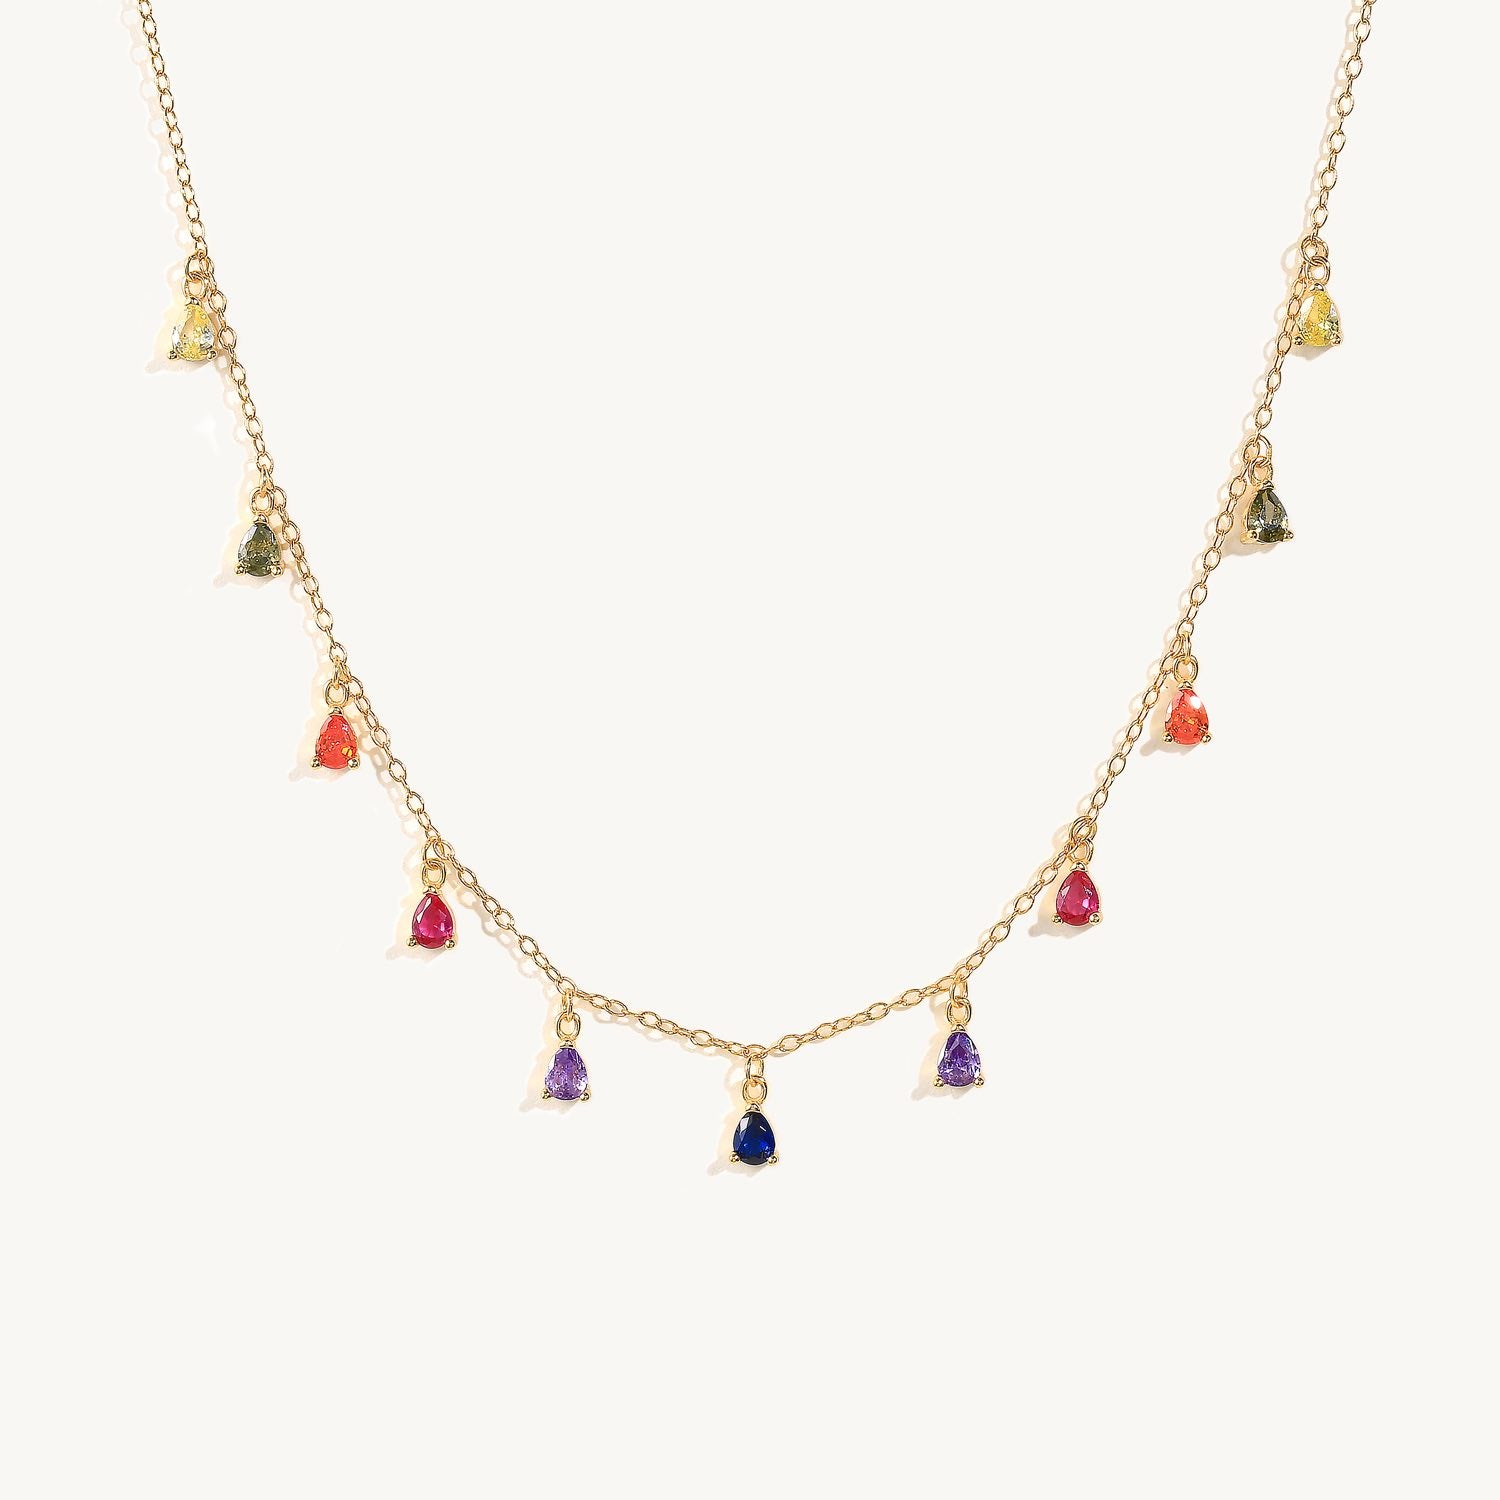 925 gold-plated sterling silver chain necklace with multicolored zirconia stones.